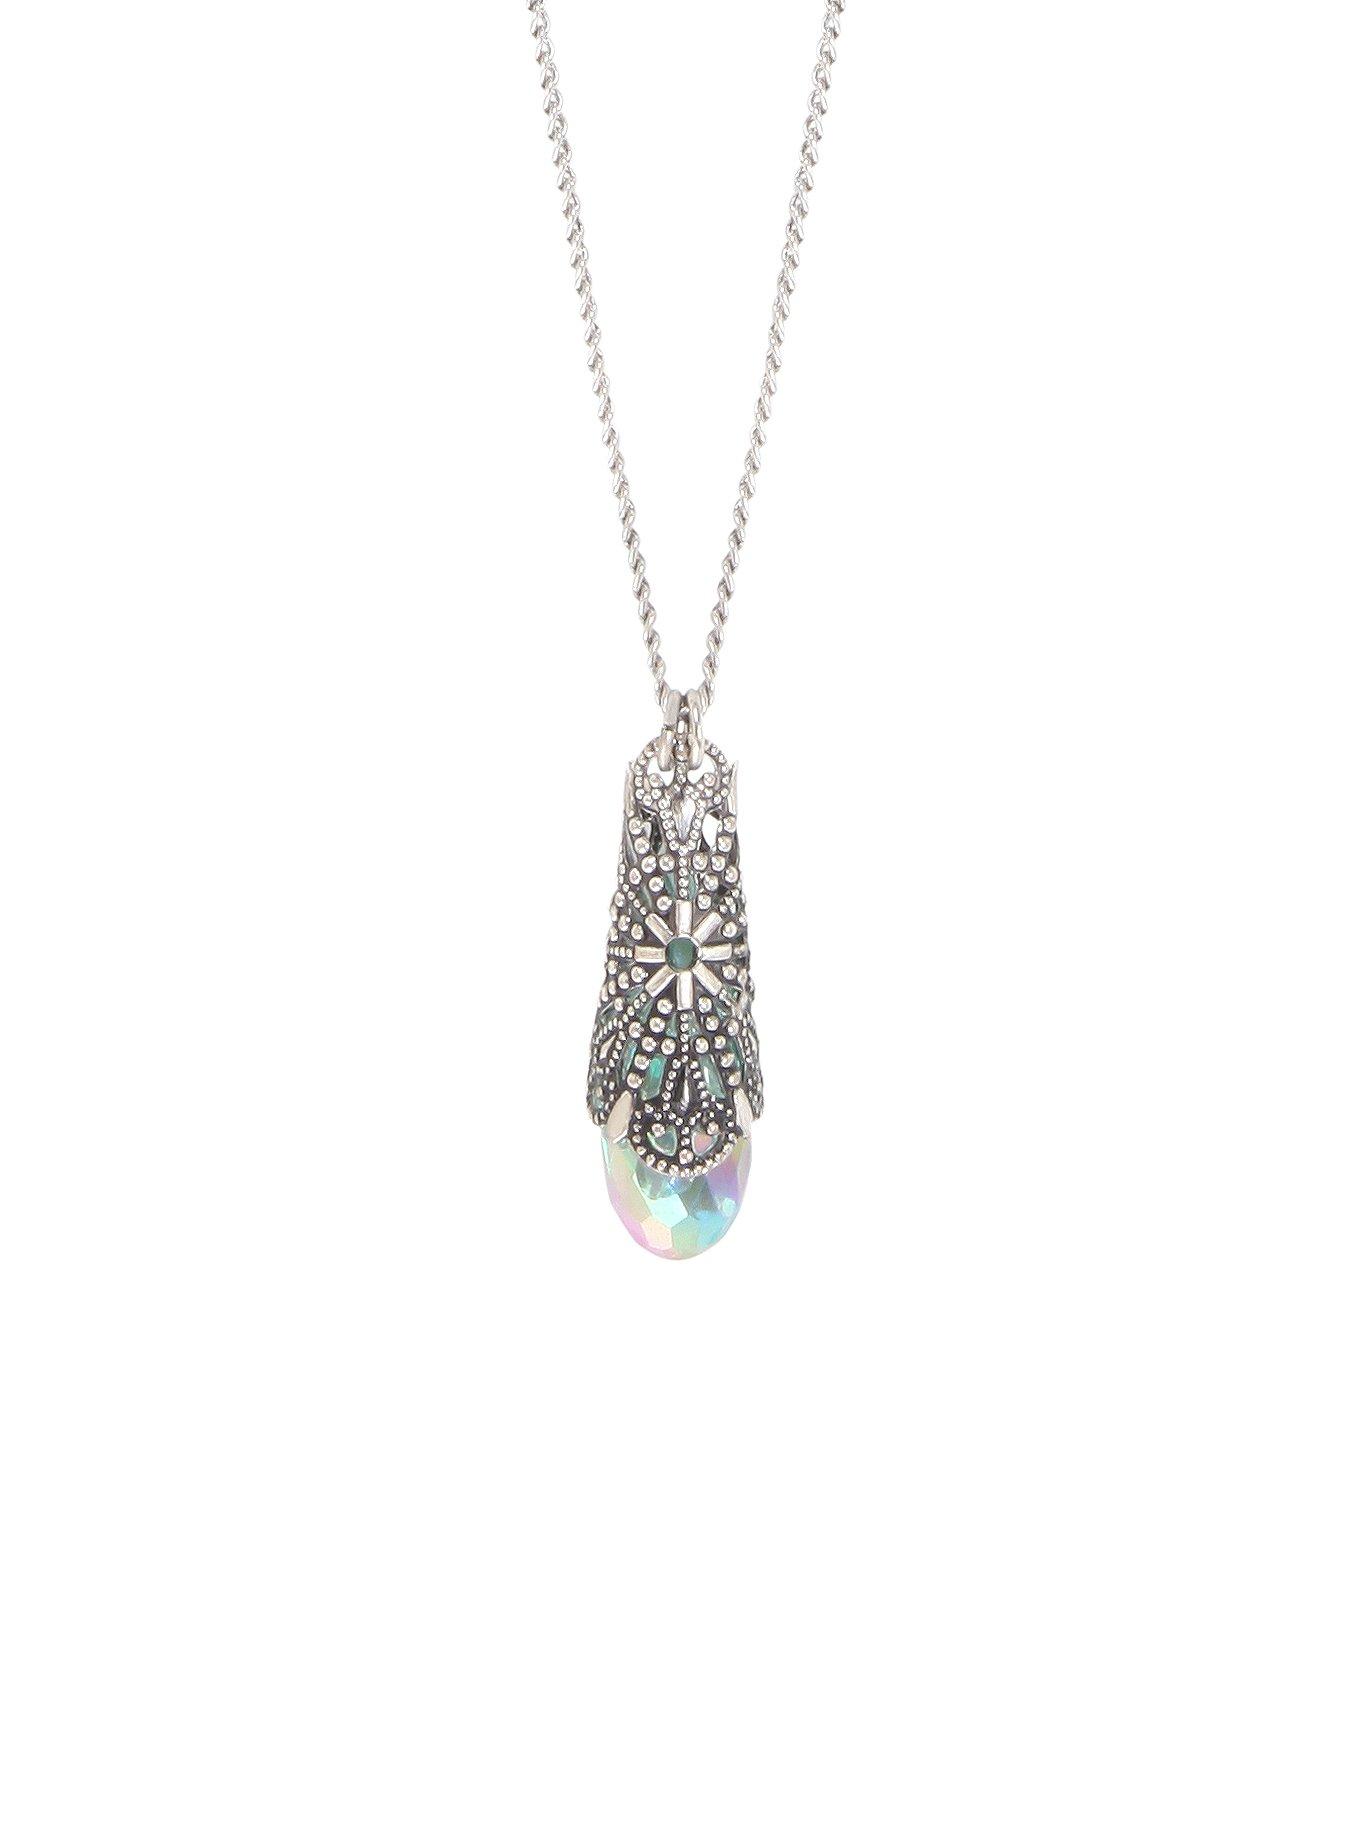 Blackheart Teal Crystal Filigree Wrap Necklace | Hot Topic